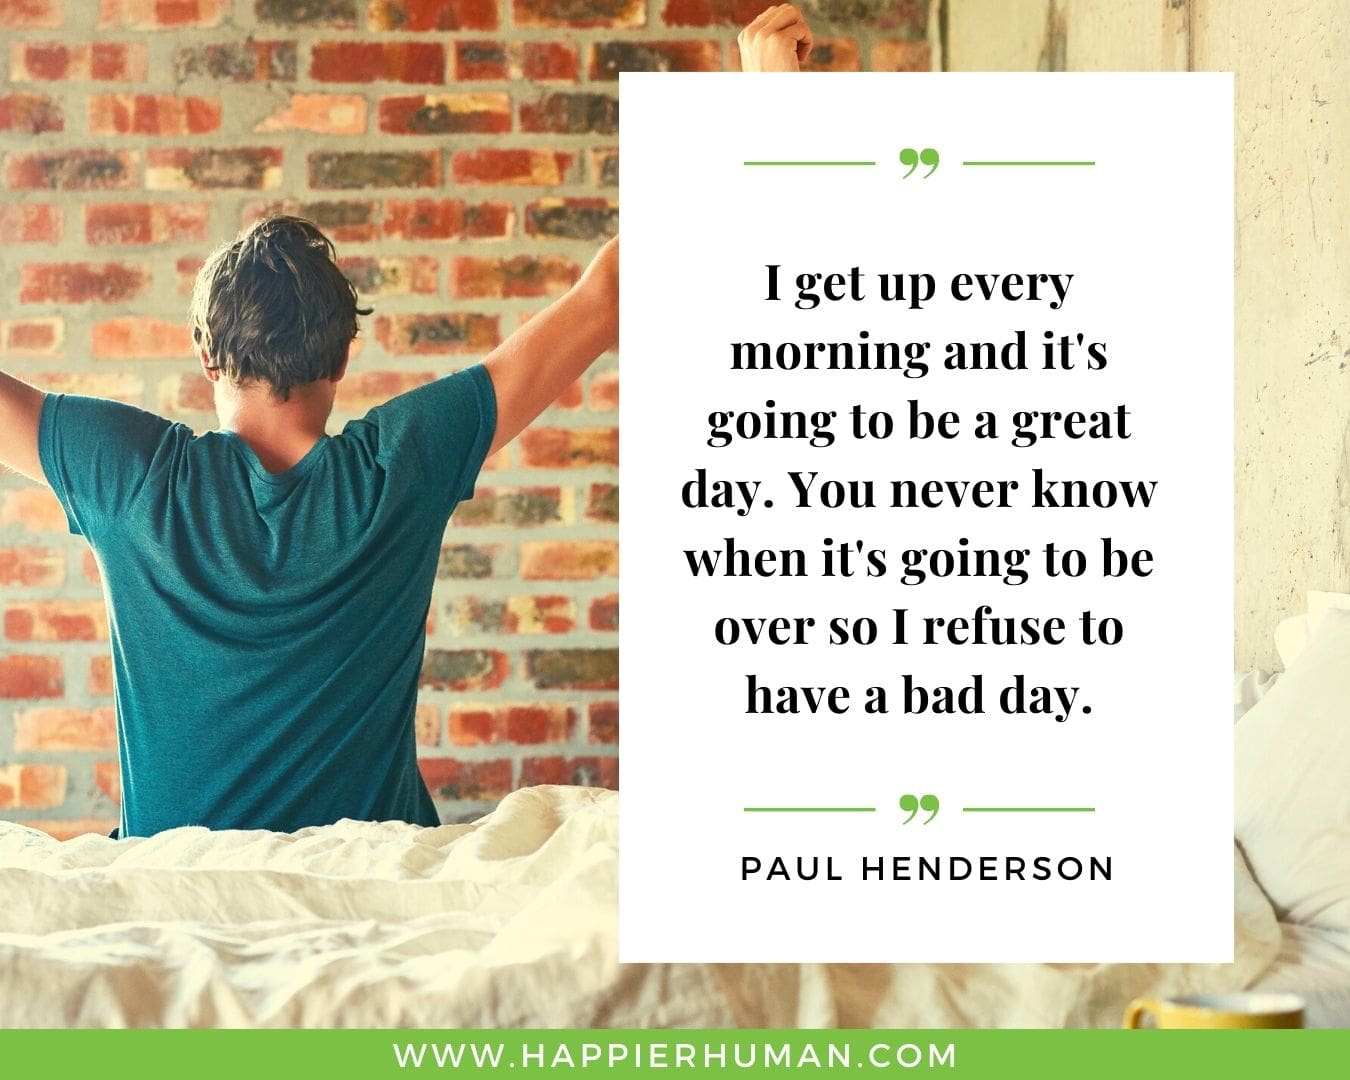 have a wonderful day quotes